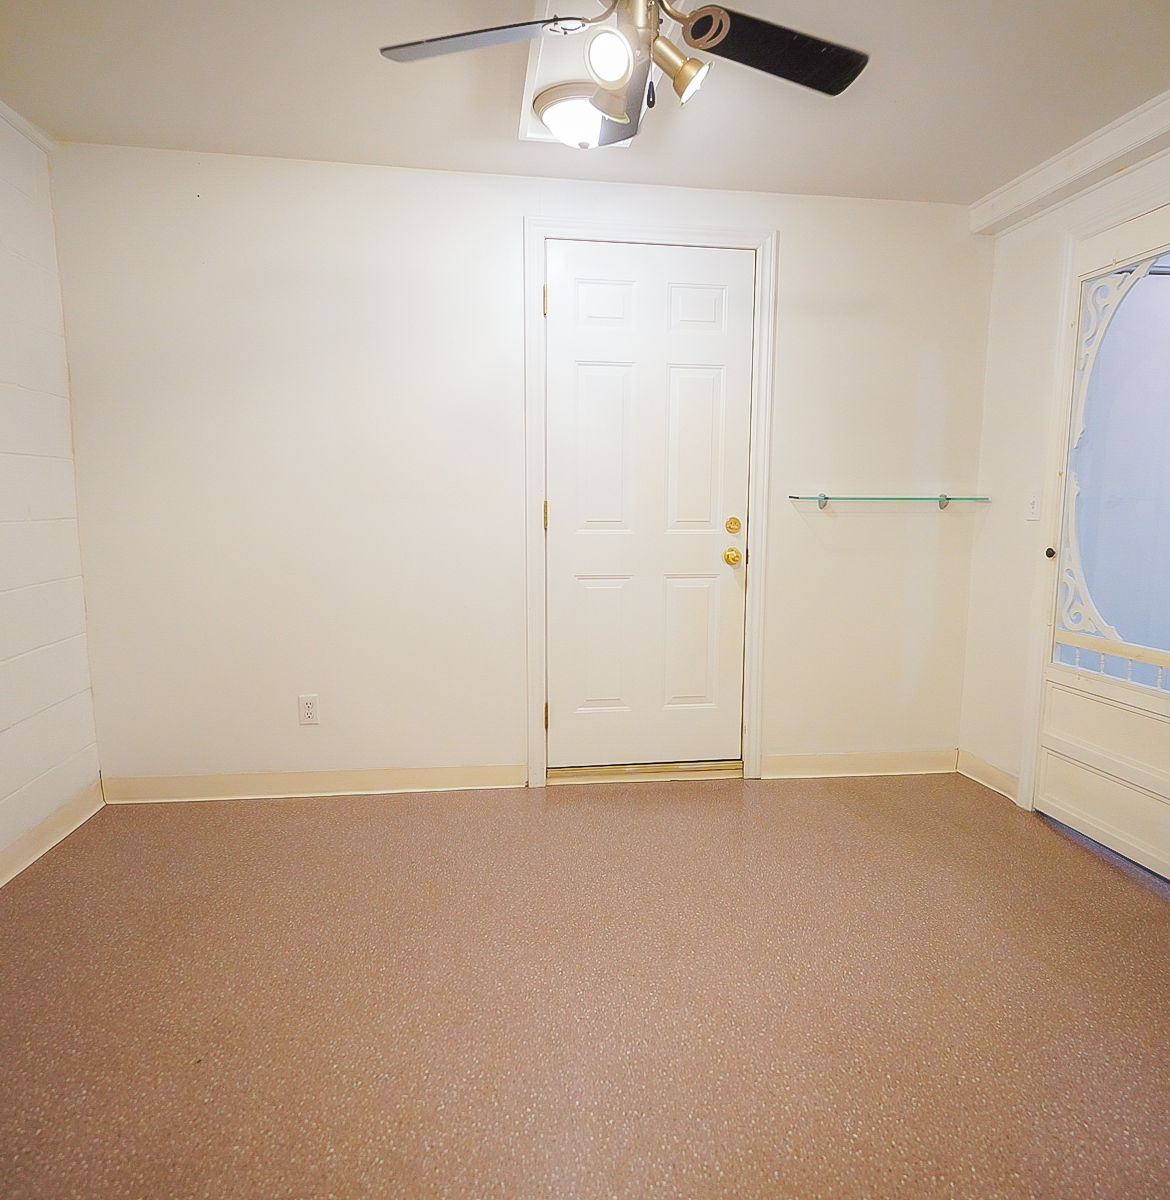 carpeted empty room with a ceiling fan